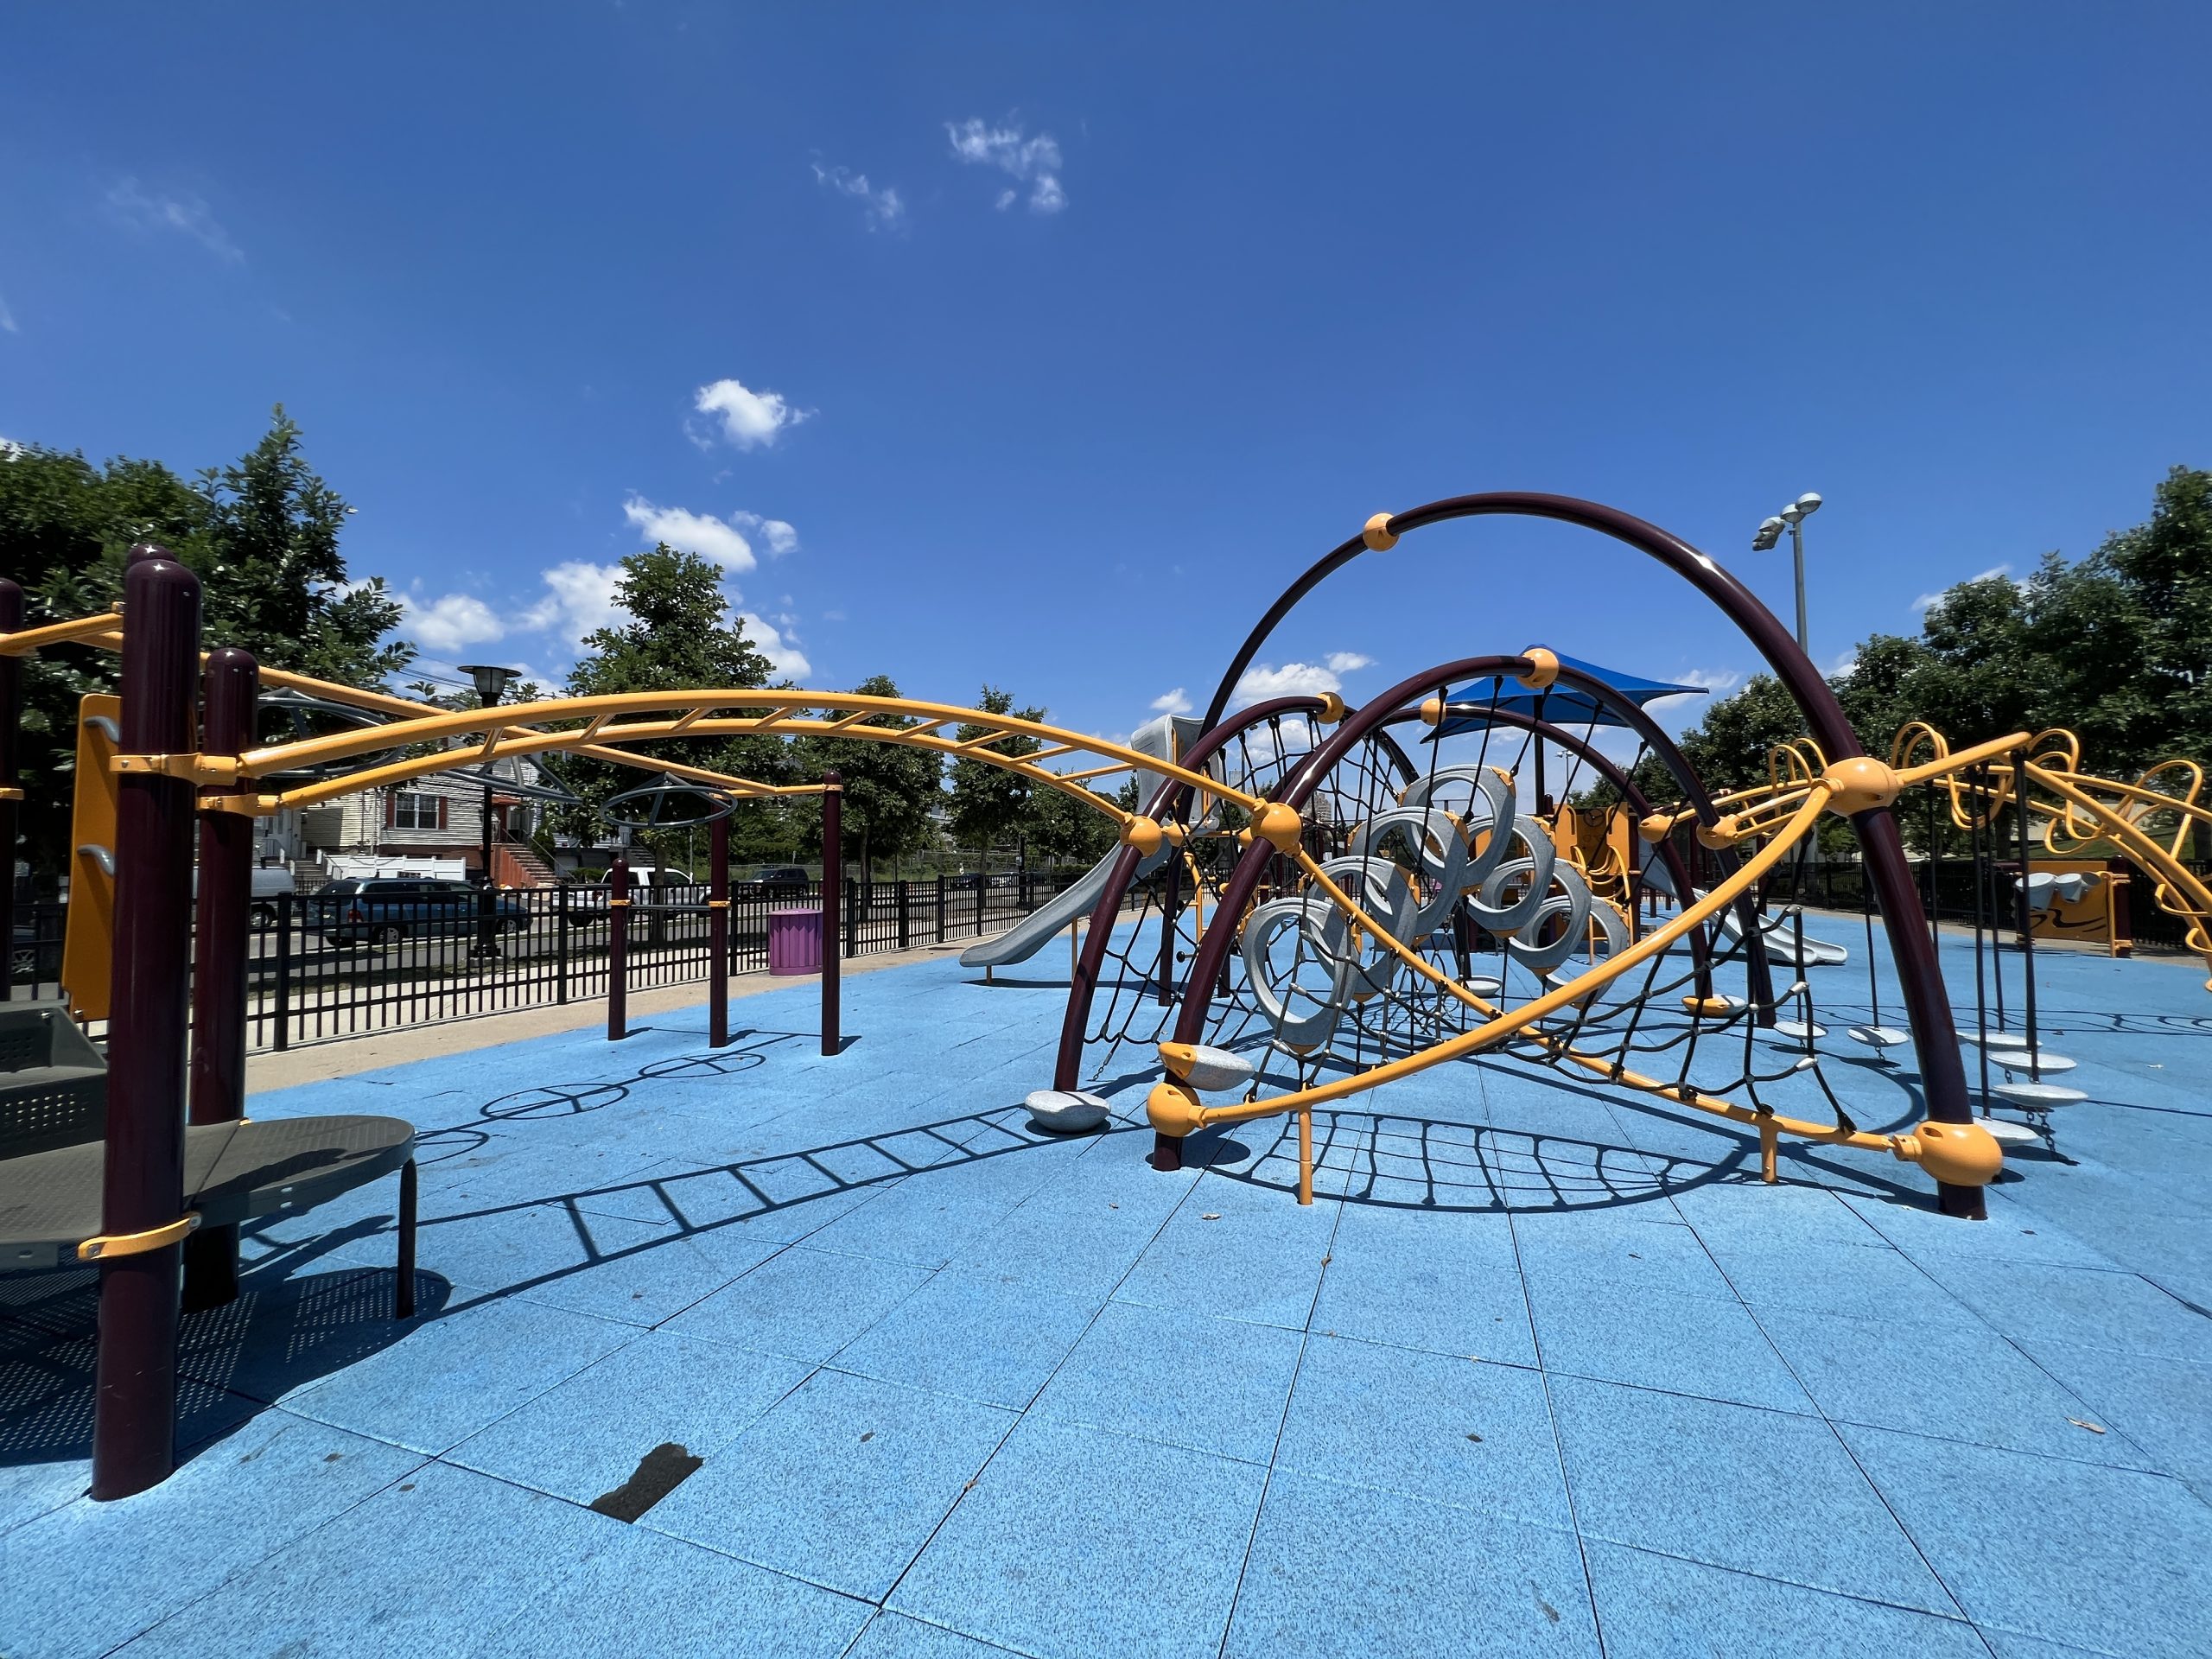 Berry Lane Park Playground in Jersey City NJ large twisting web and ladders with o ring climbers wide shot of backside 1